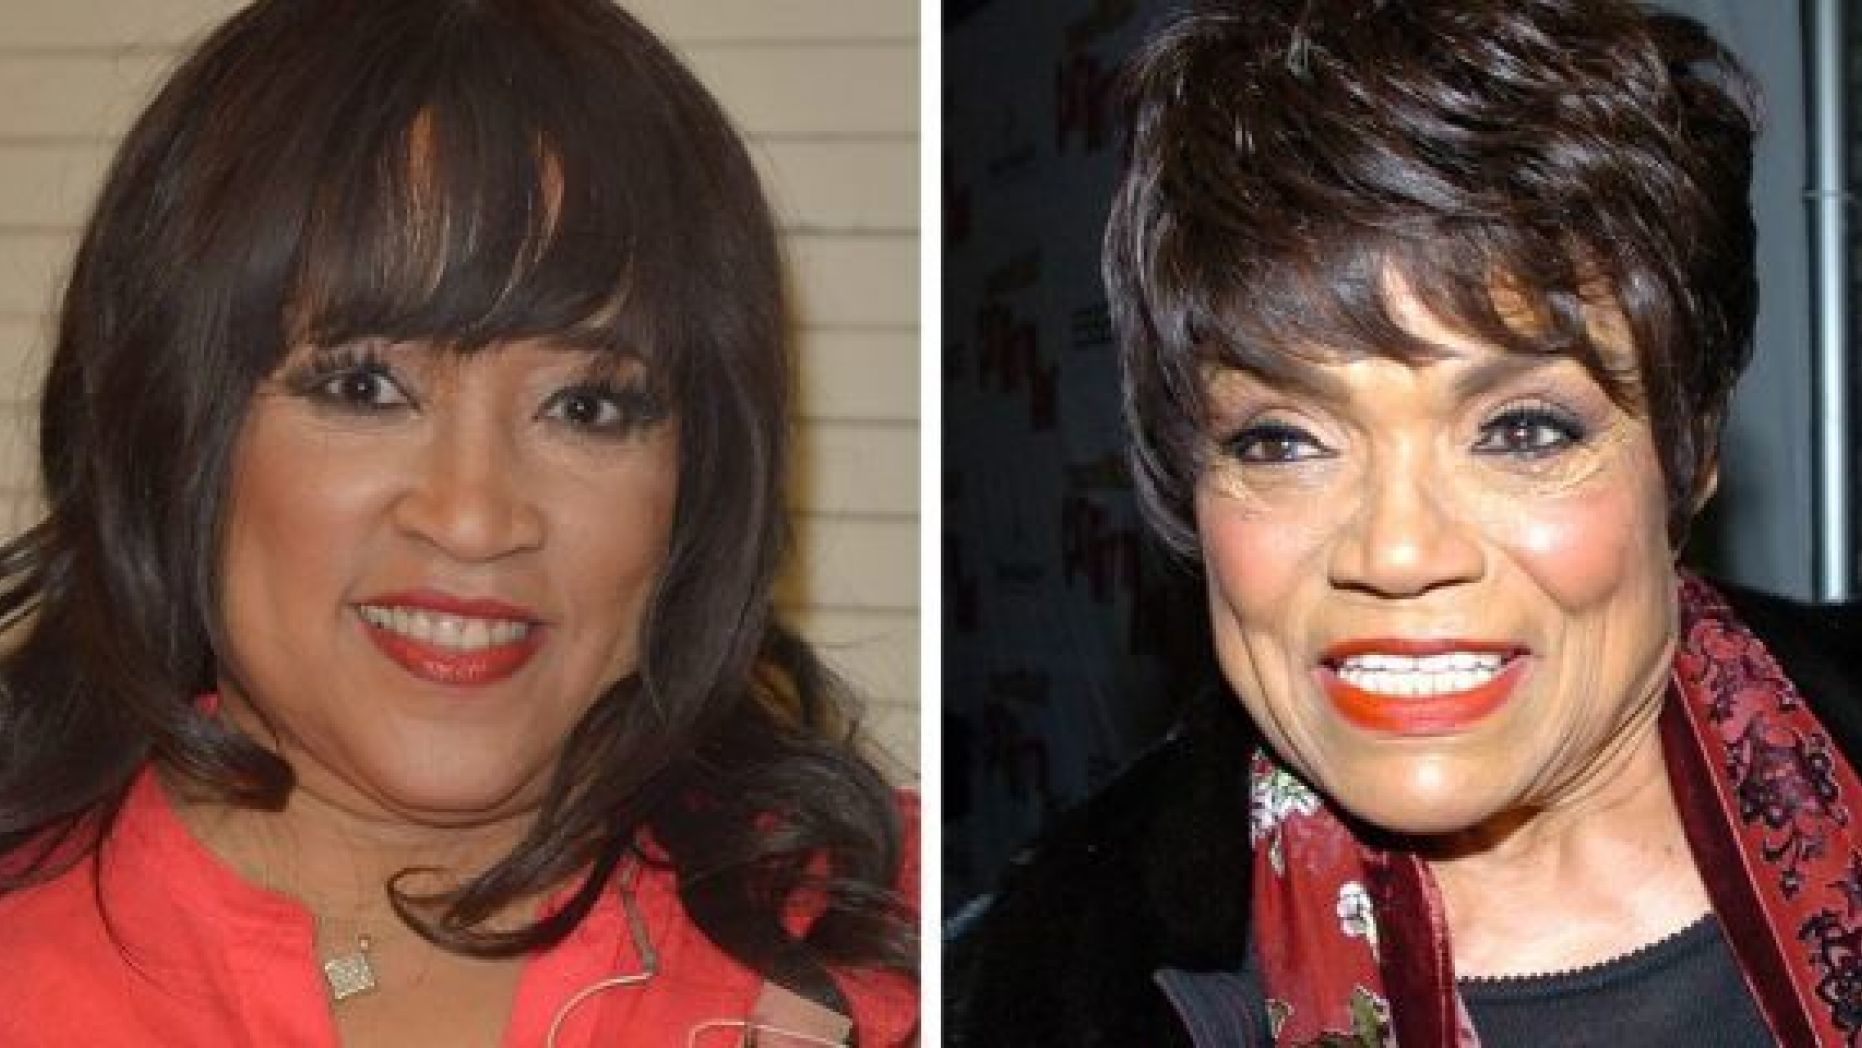 ‘Sister, Sister’ star Jackée Harry, left, claims she was slapped by late singer Eartha Kitt after allegedly unknowingly sleeping with Kitt's boyfriend.